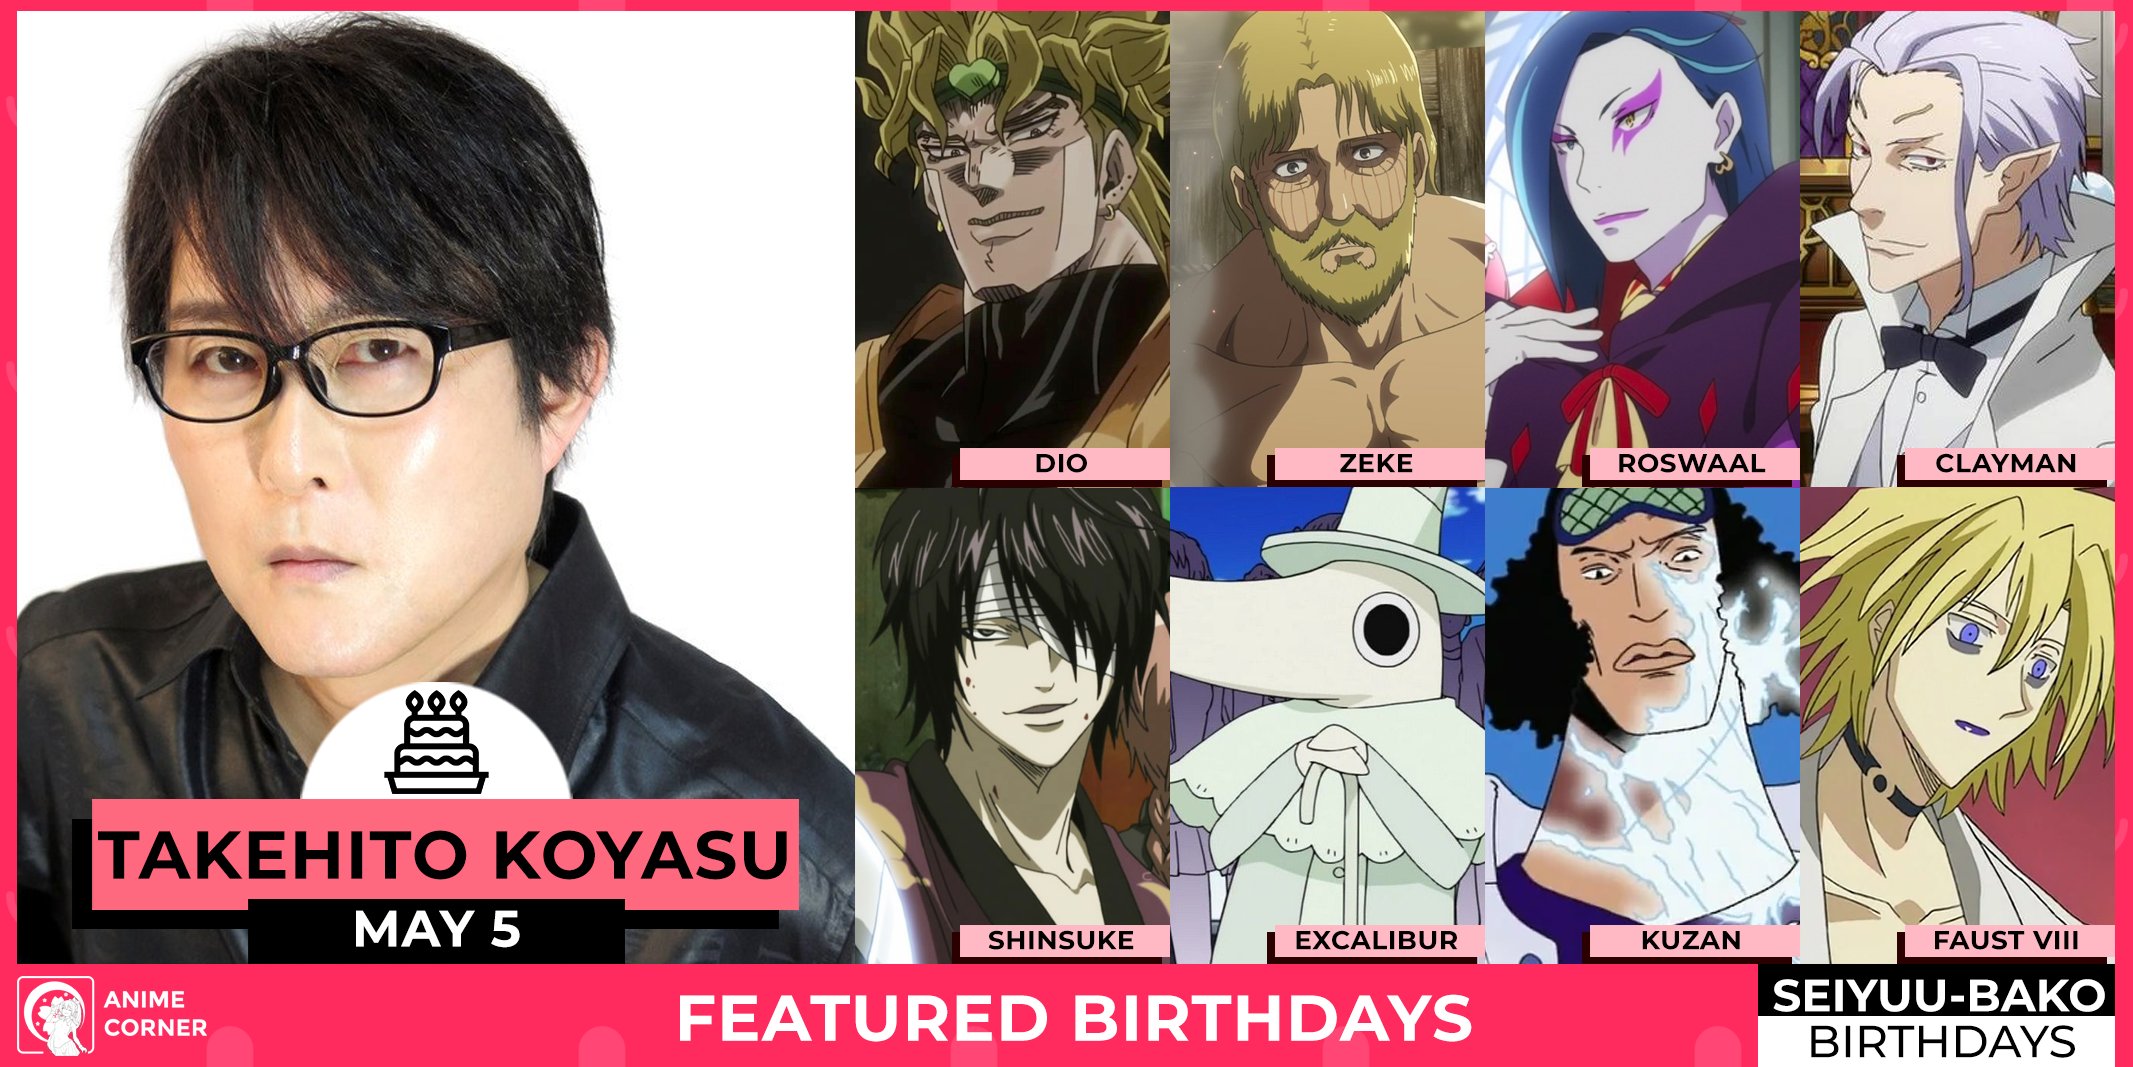 X 上的Anime Corner：「Happy 54th Birthday, Takehito Koyasu! He is known to voice  notable characters like Dio Brando in JoJo's Bizarre Adventure, Zeke Yeager  in Attack on Titan, Roswaal L. Mathers in